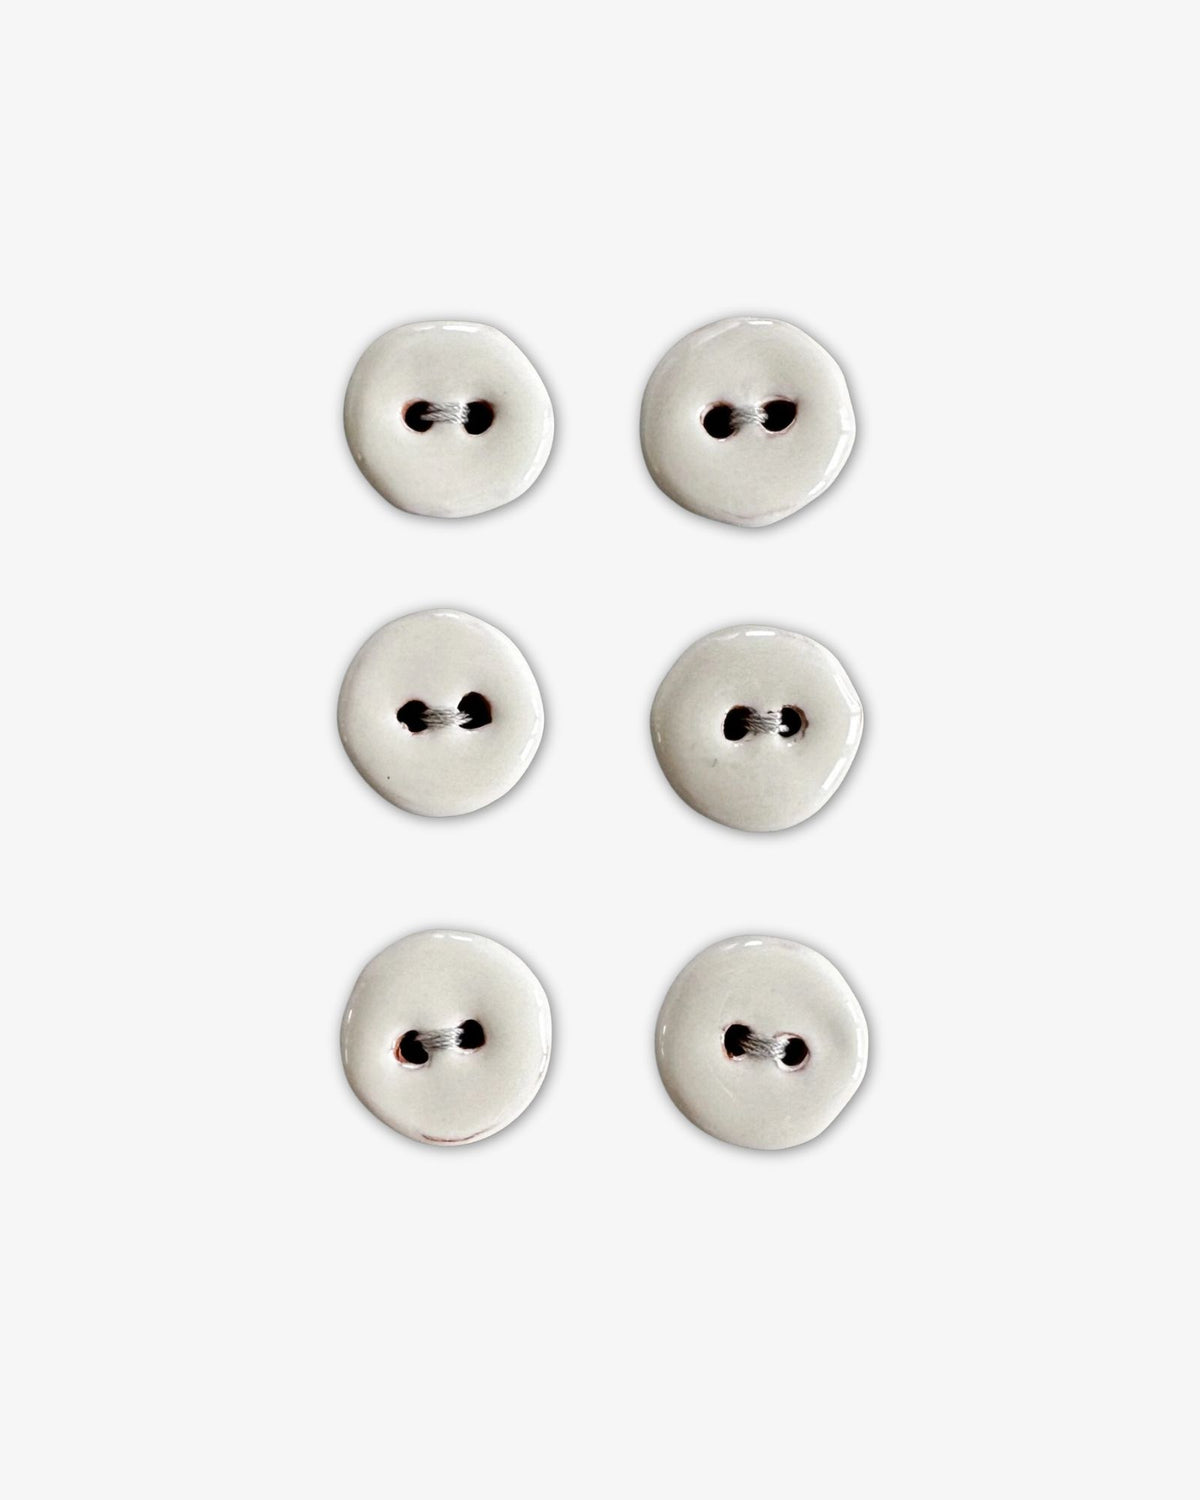 Small Ceramic Buttons by Studio Carta | Tolemaide